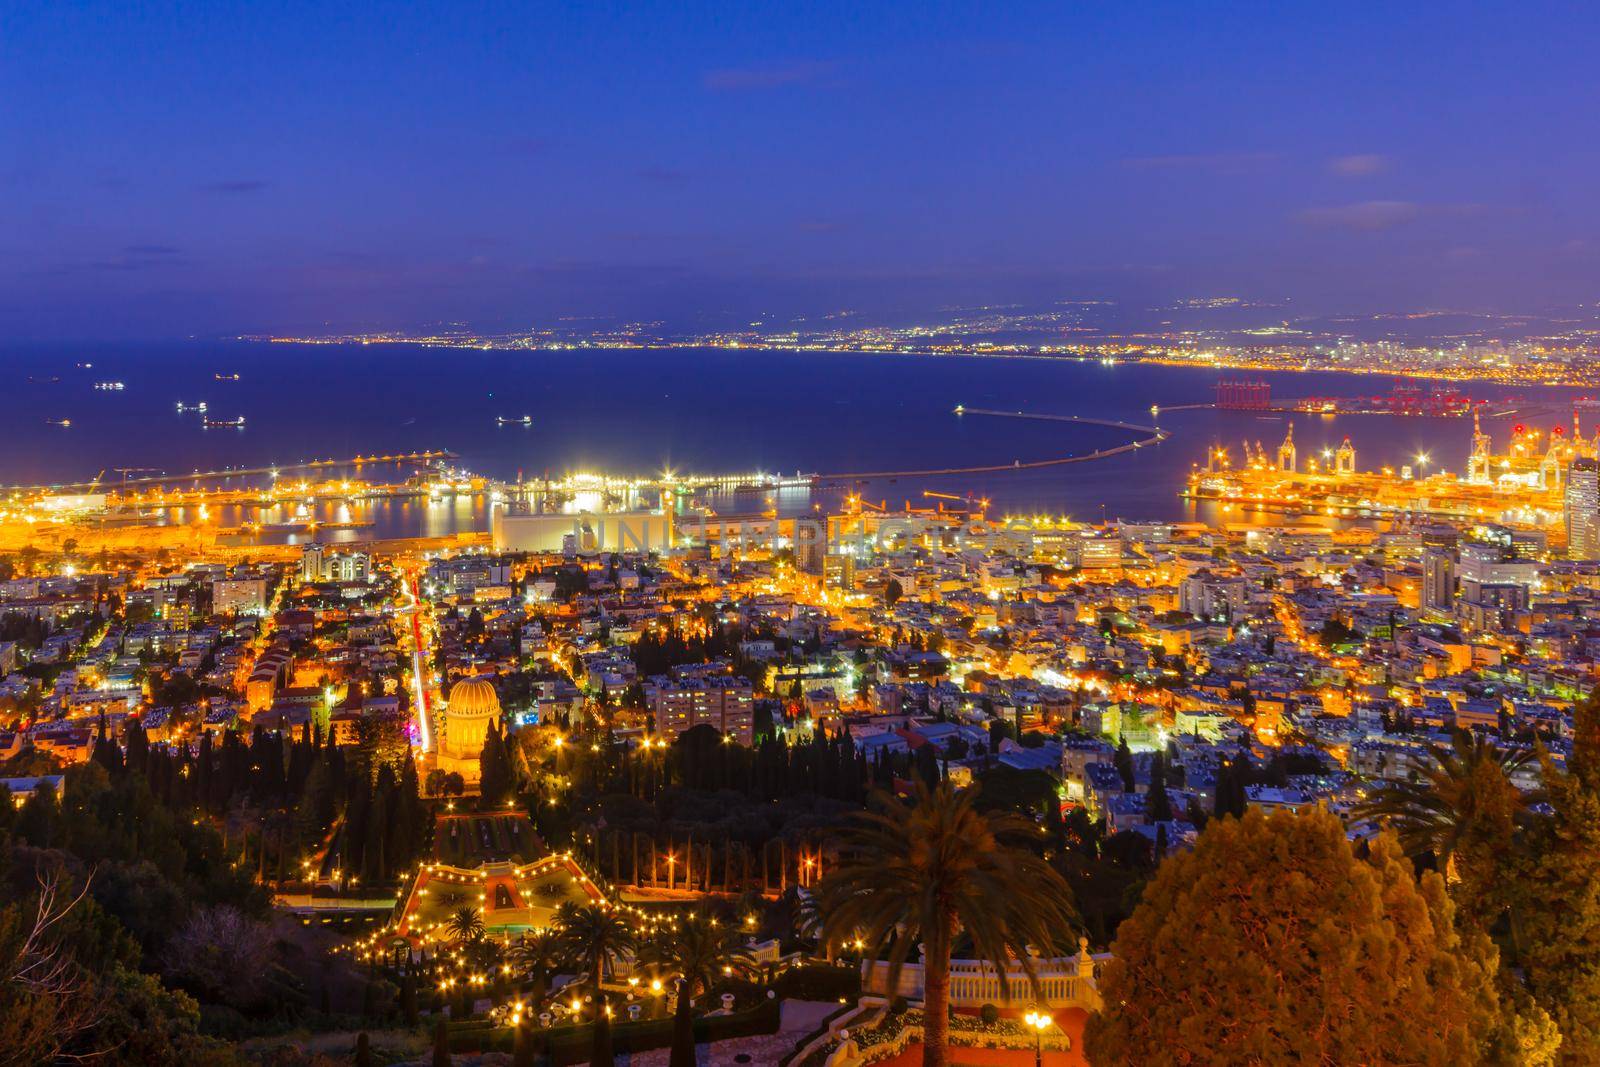 Night view of the Bahai Shrine and gardens, with the downtown and the port, in Haifa, Northern Israel